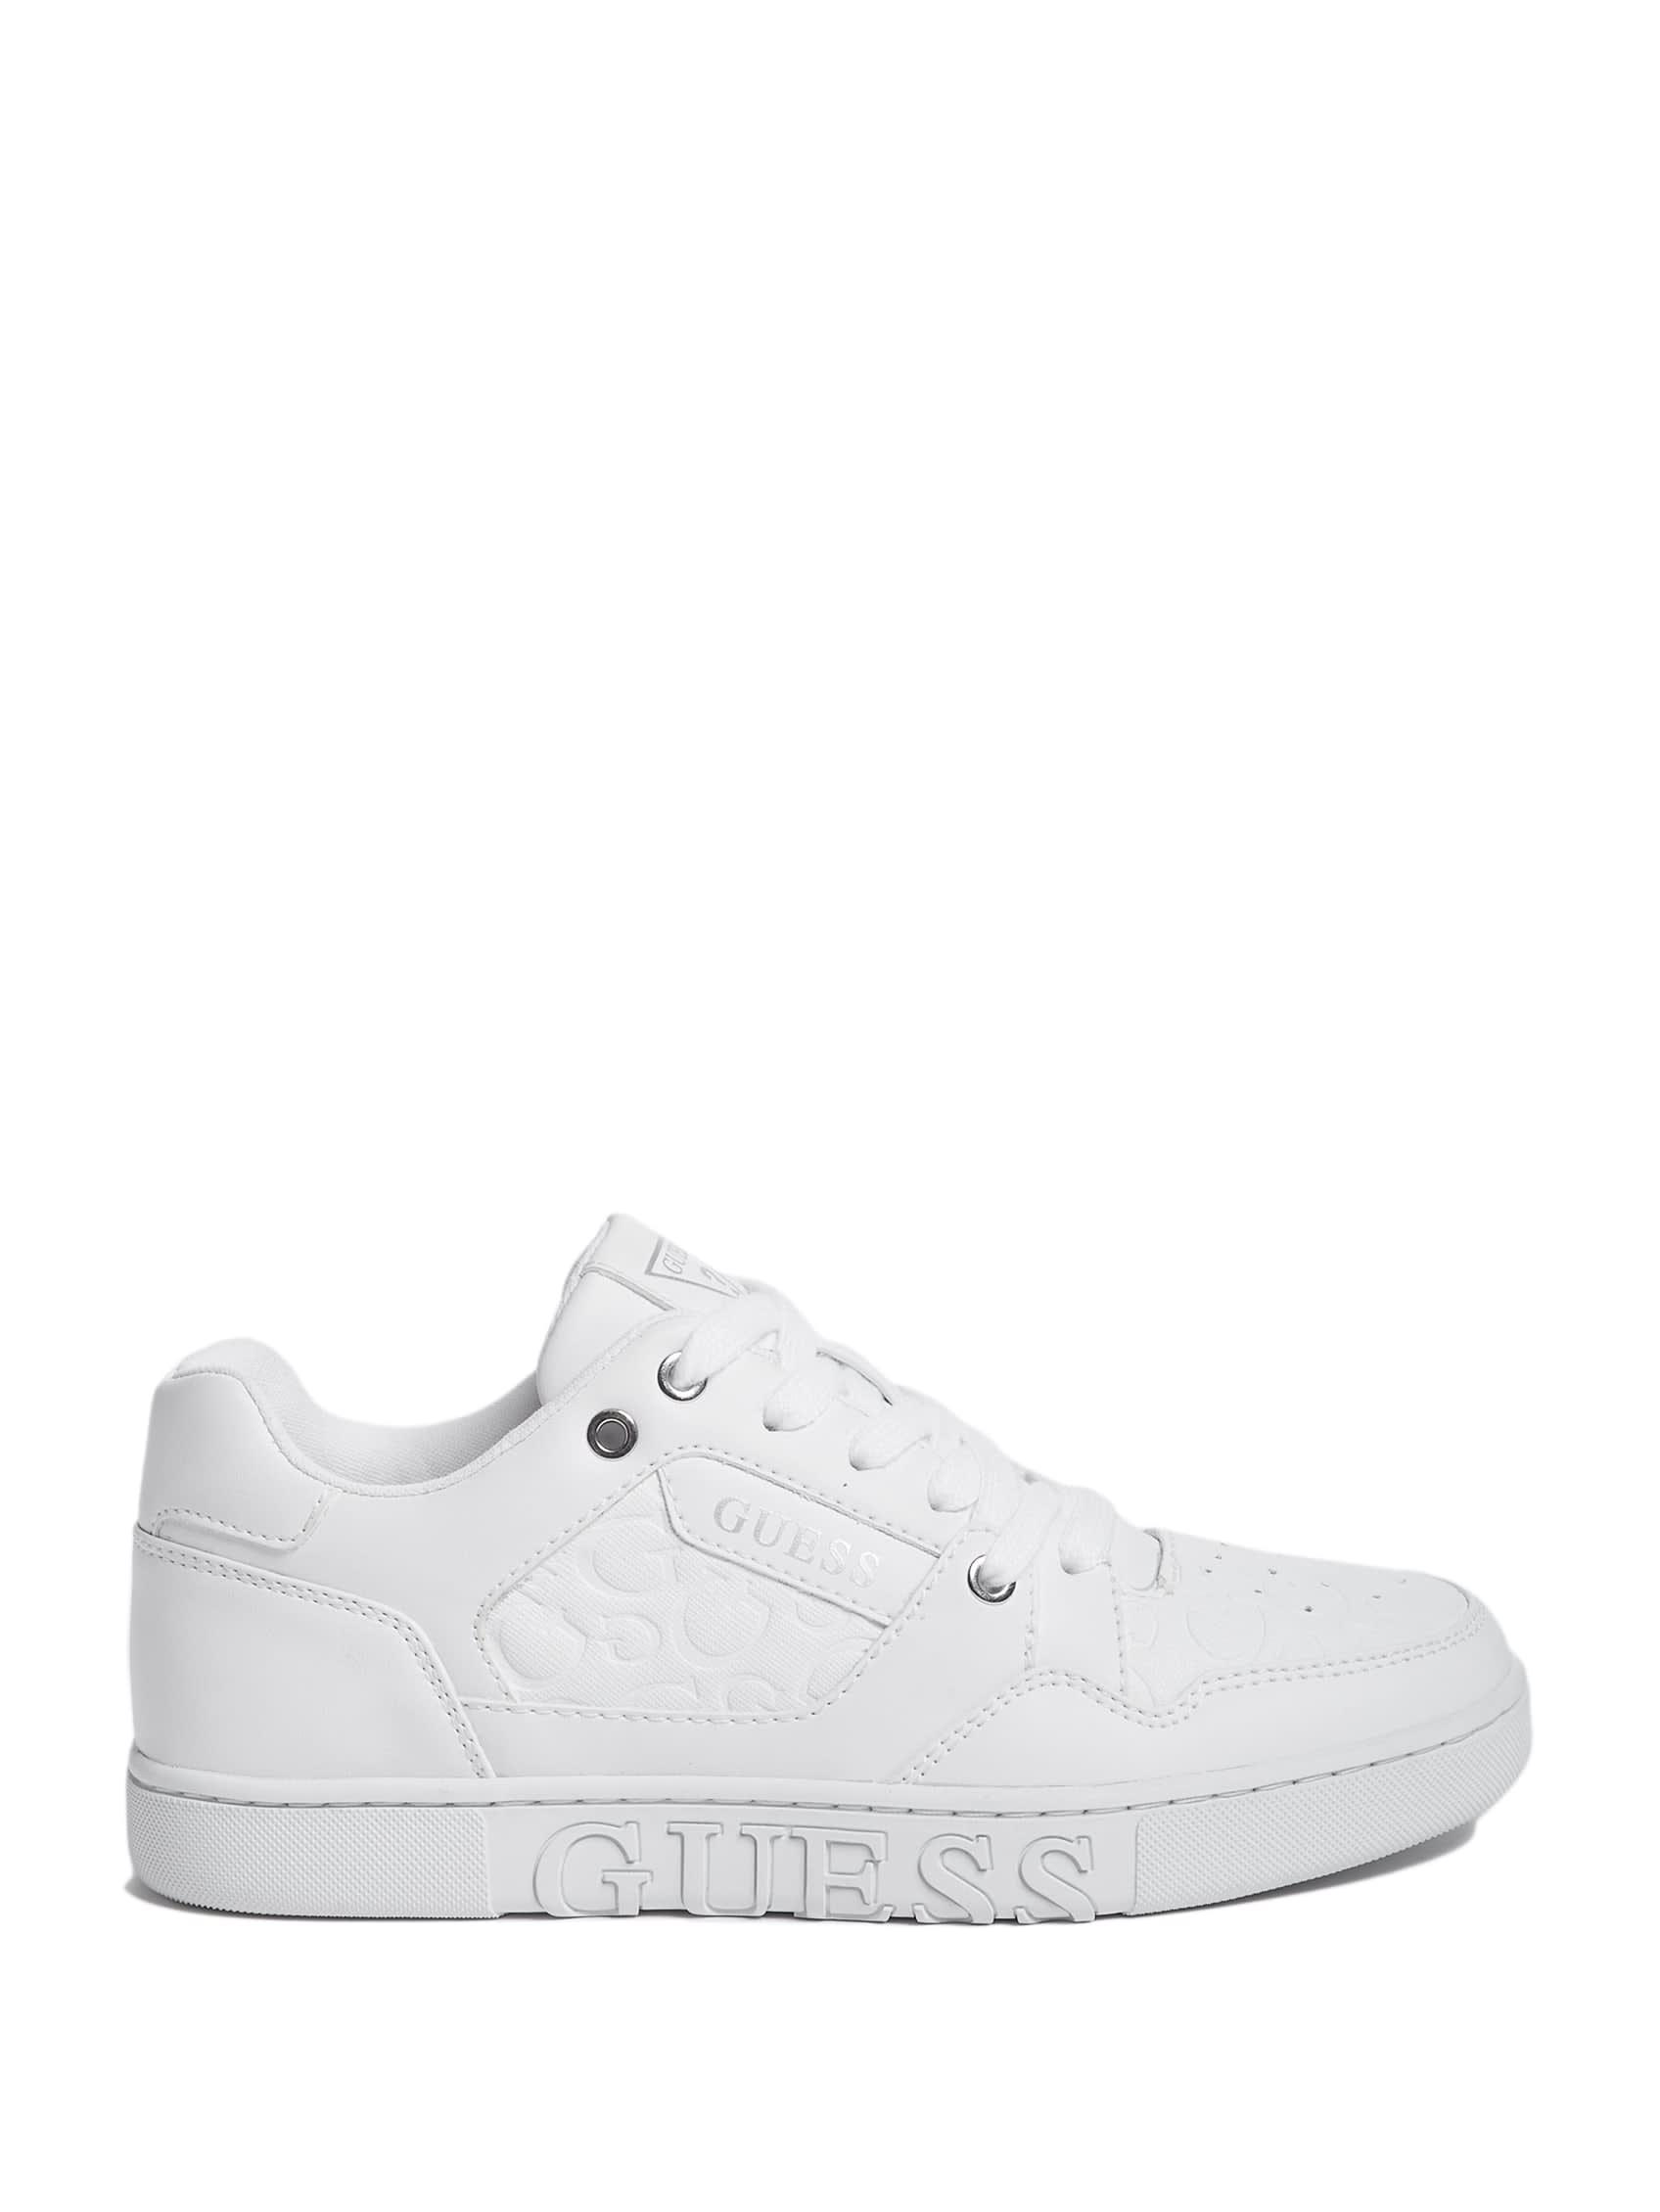 Guess Factory Jetting Low-top Logo Sneakers in White | Lyst